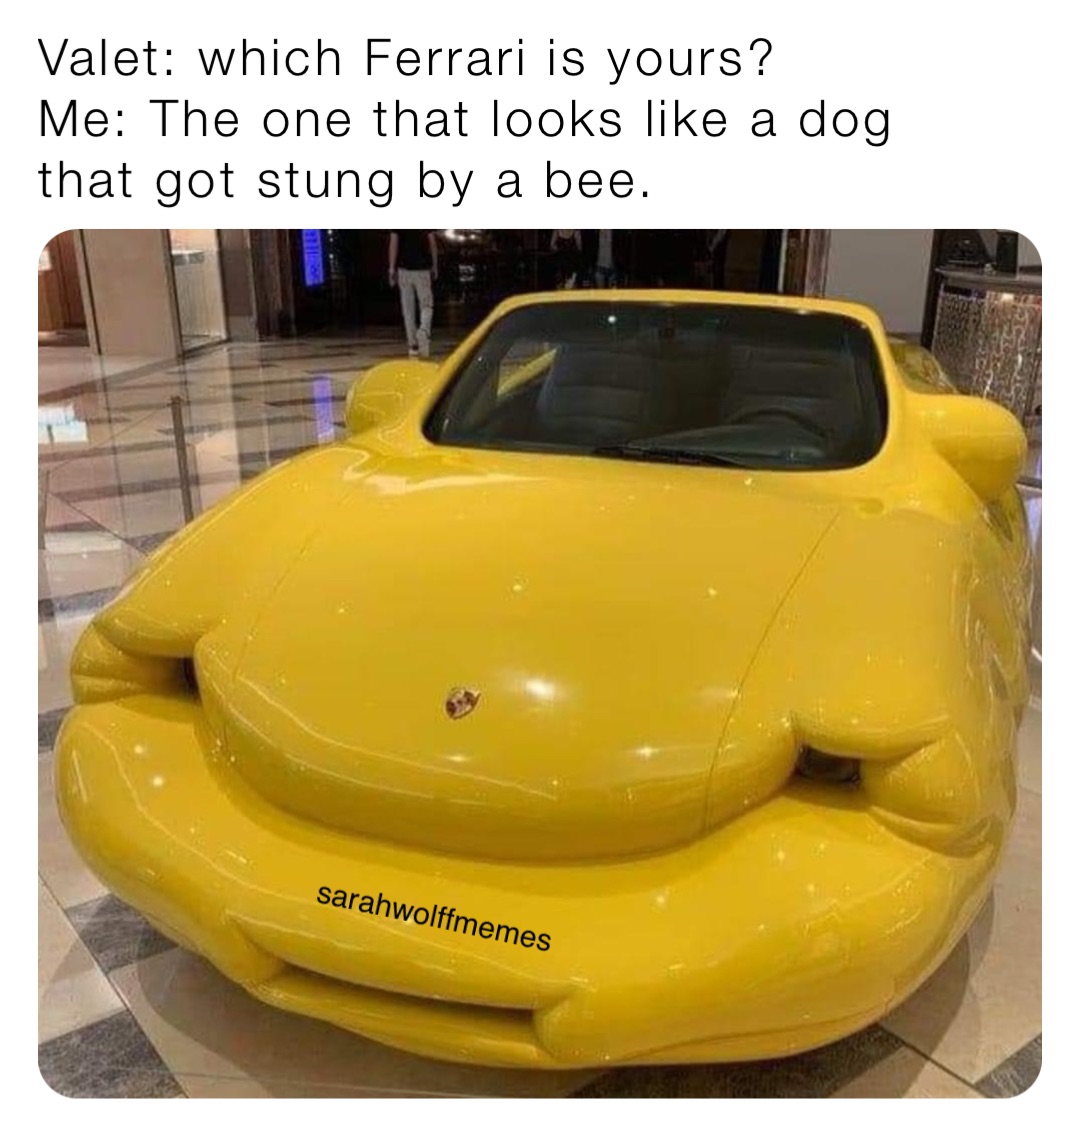 Valet: which Ferrari is yours?
Me: The one that looks like a dog that got stung by a bee.